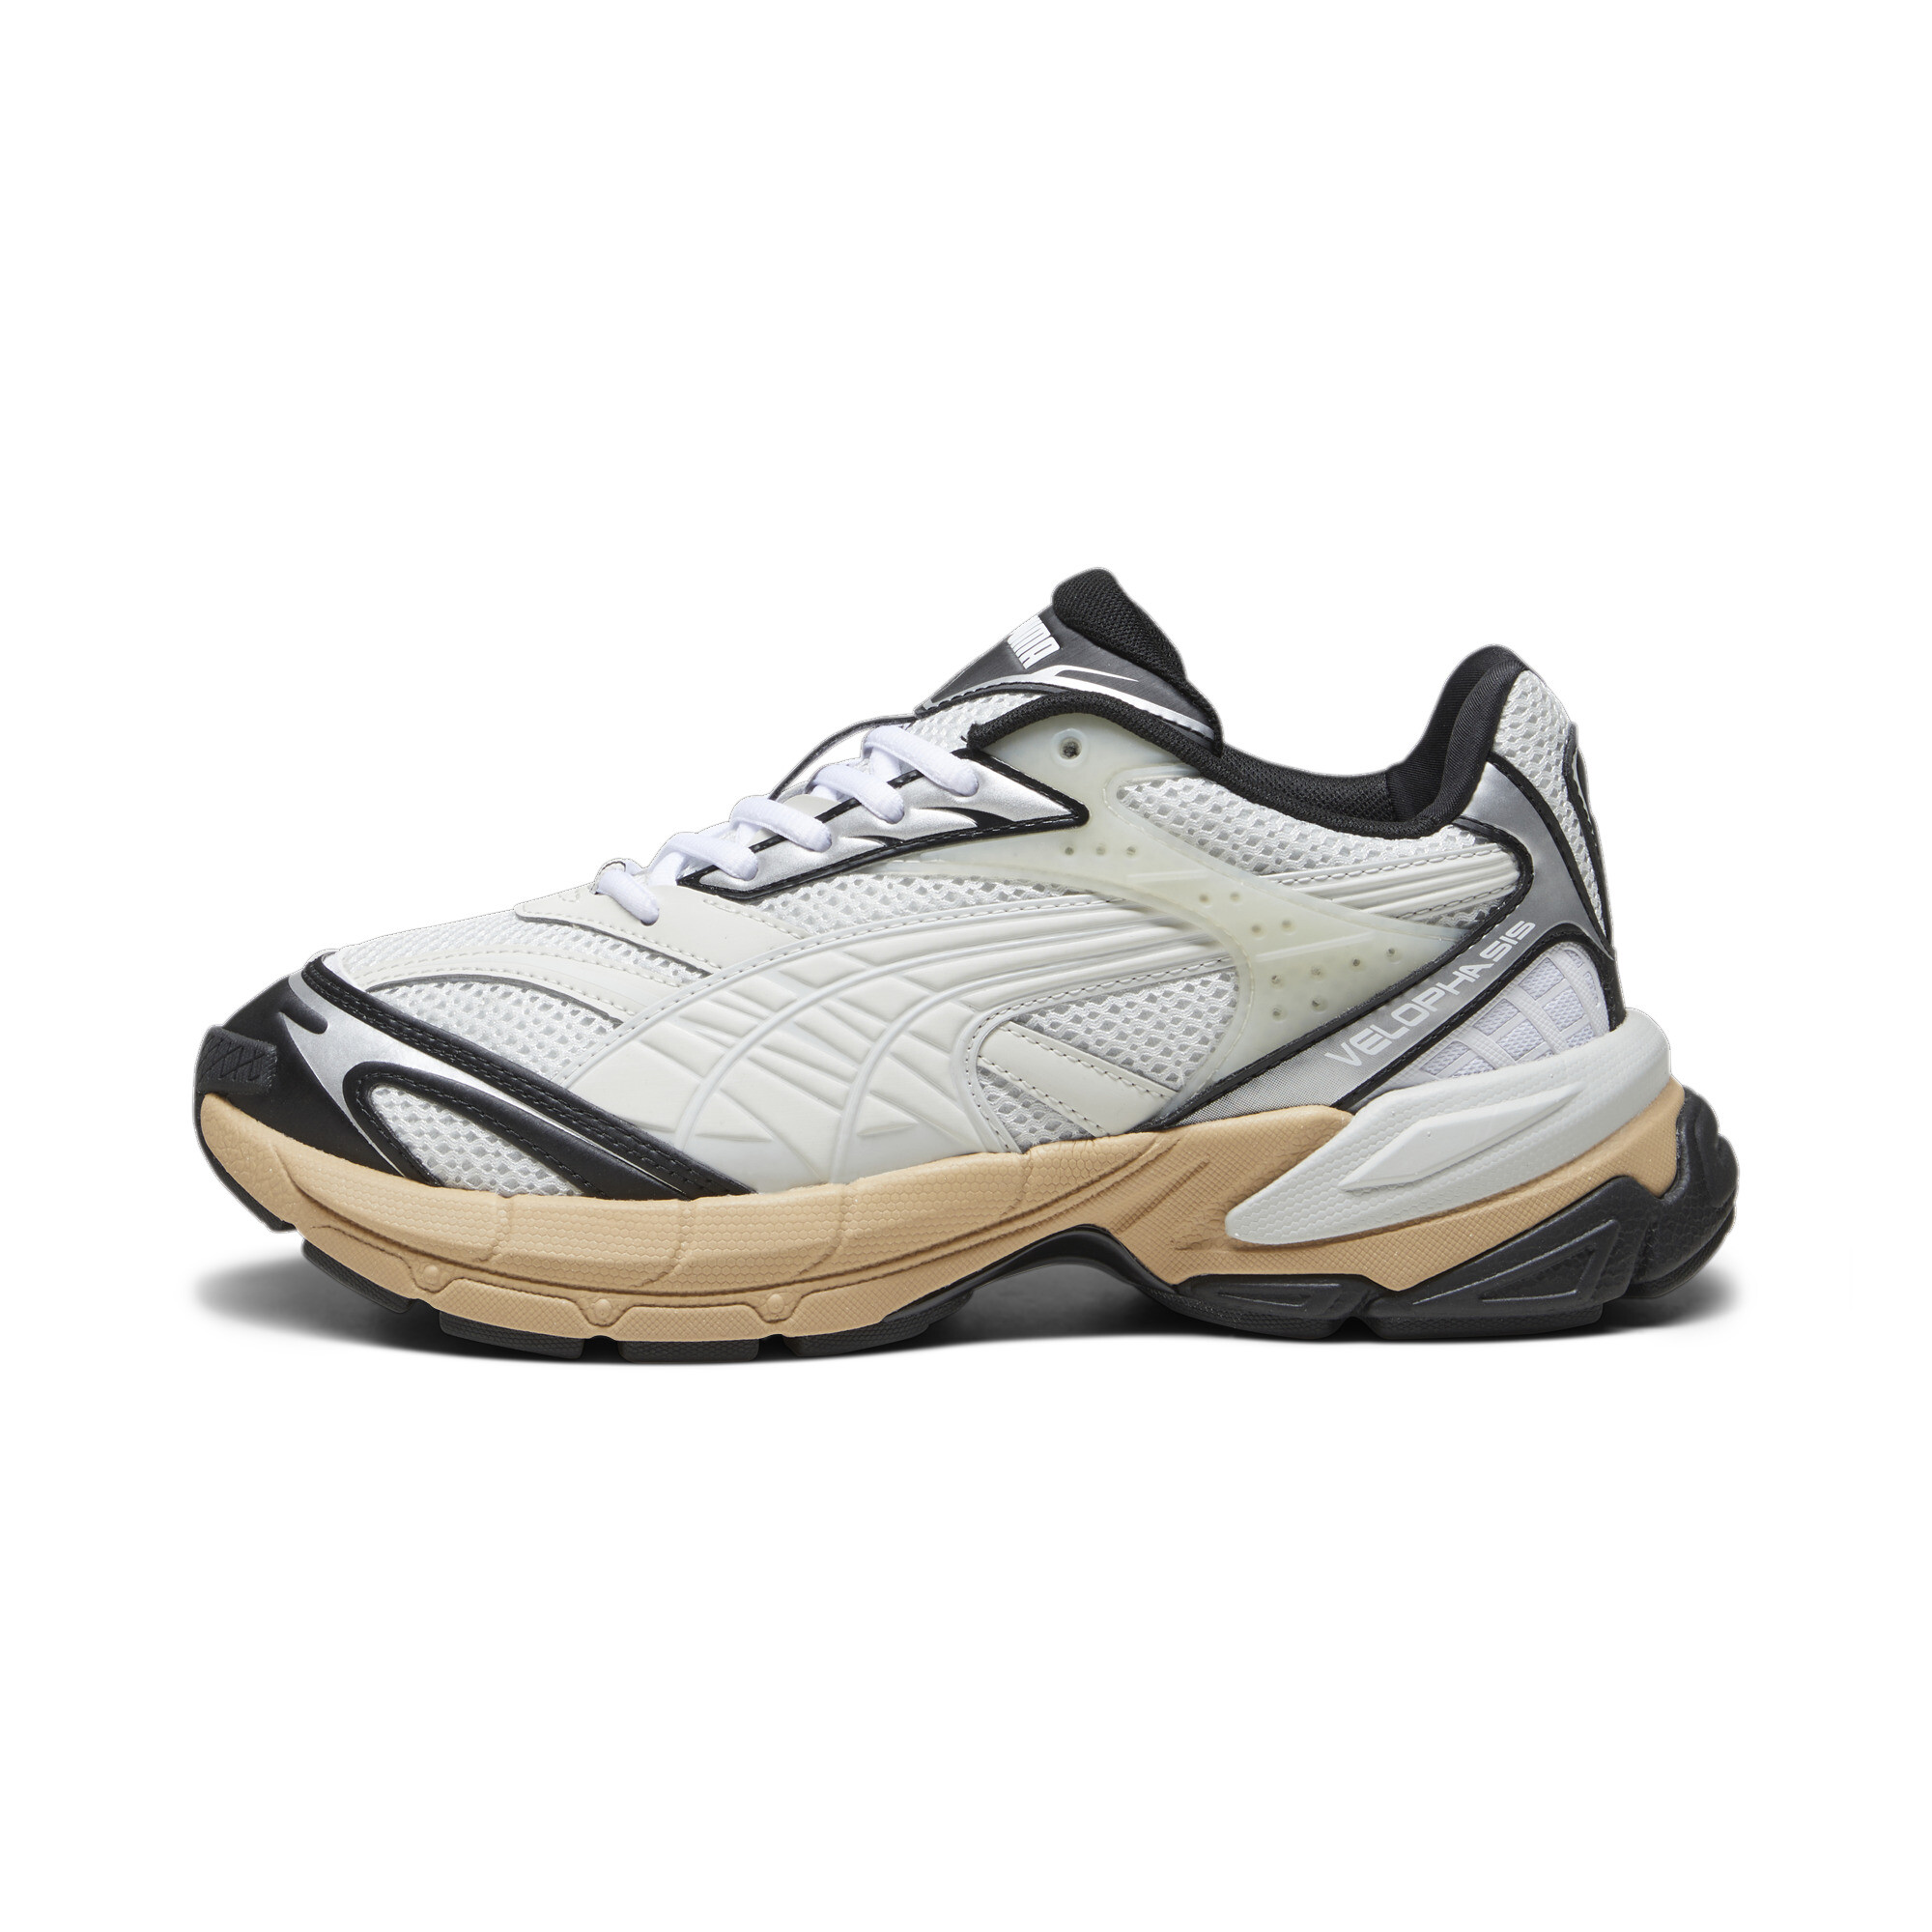 Puma Velophasis Technisch Sneakers, Gray, Size 44, Shoes